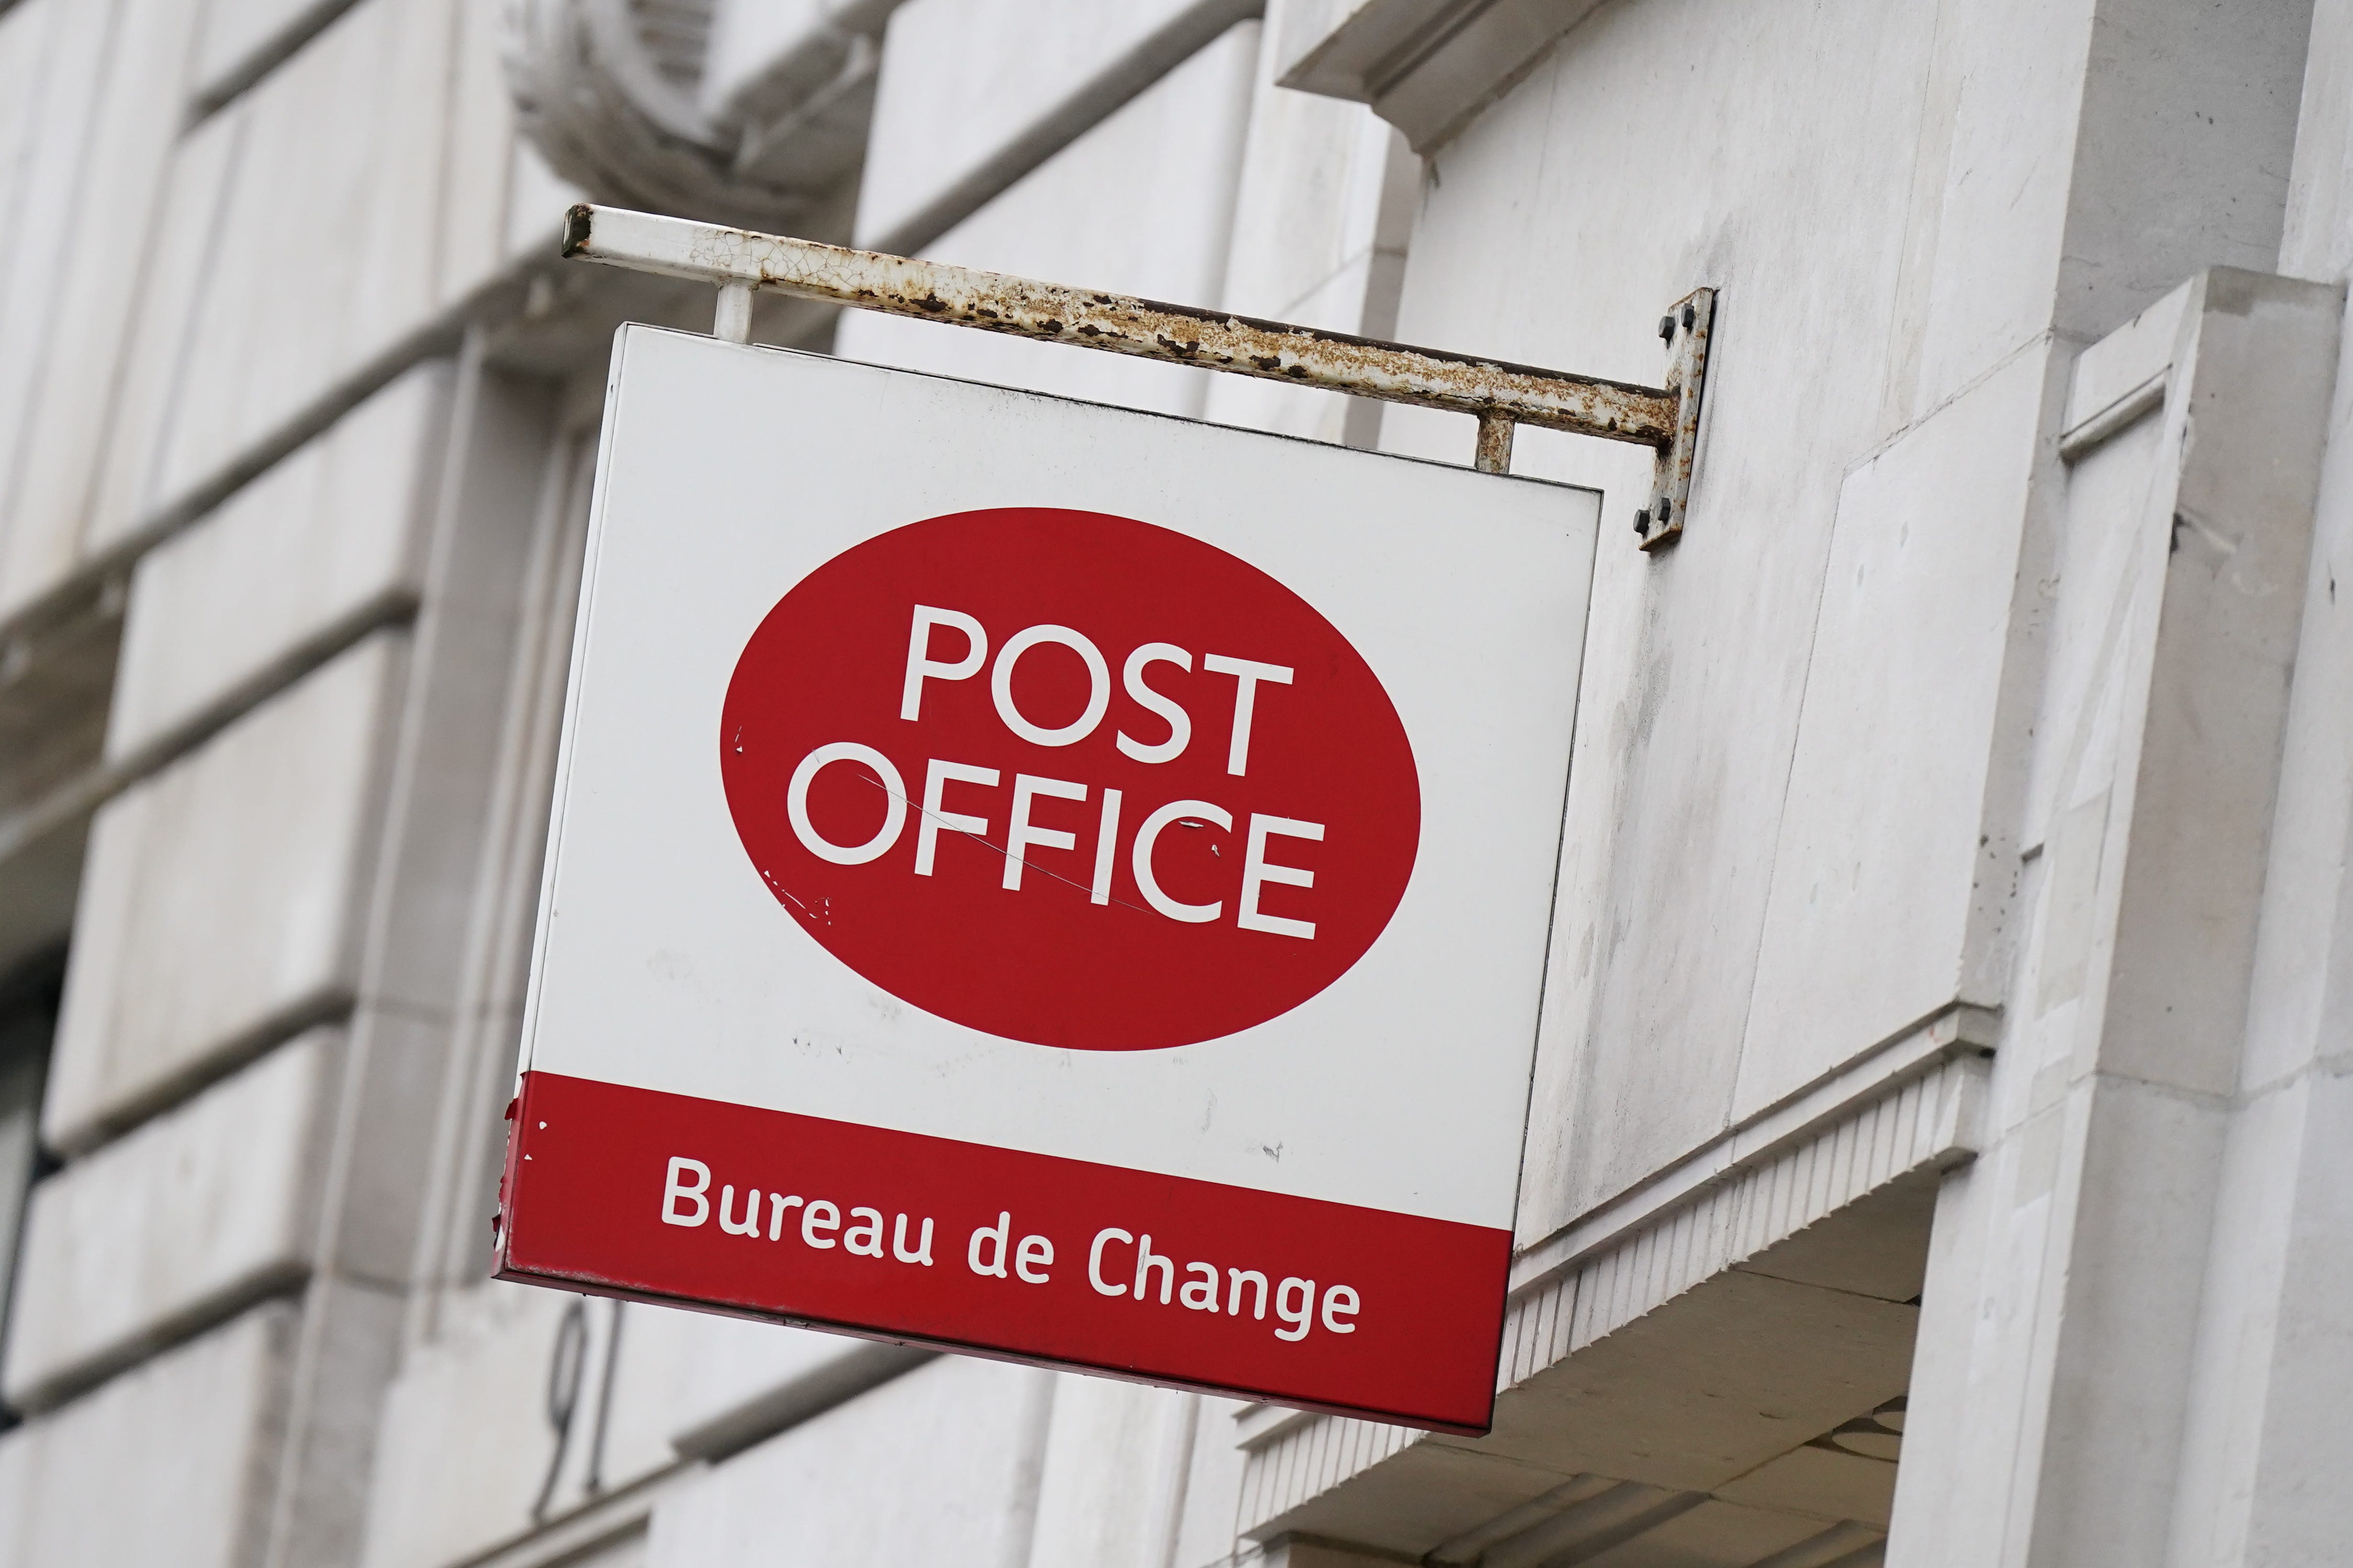 Ministers are facing questions following the claims by the former Post Office chair